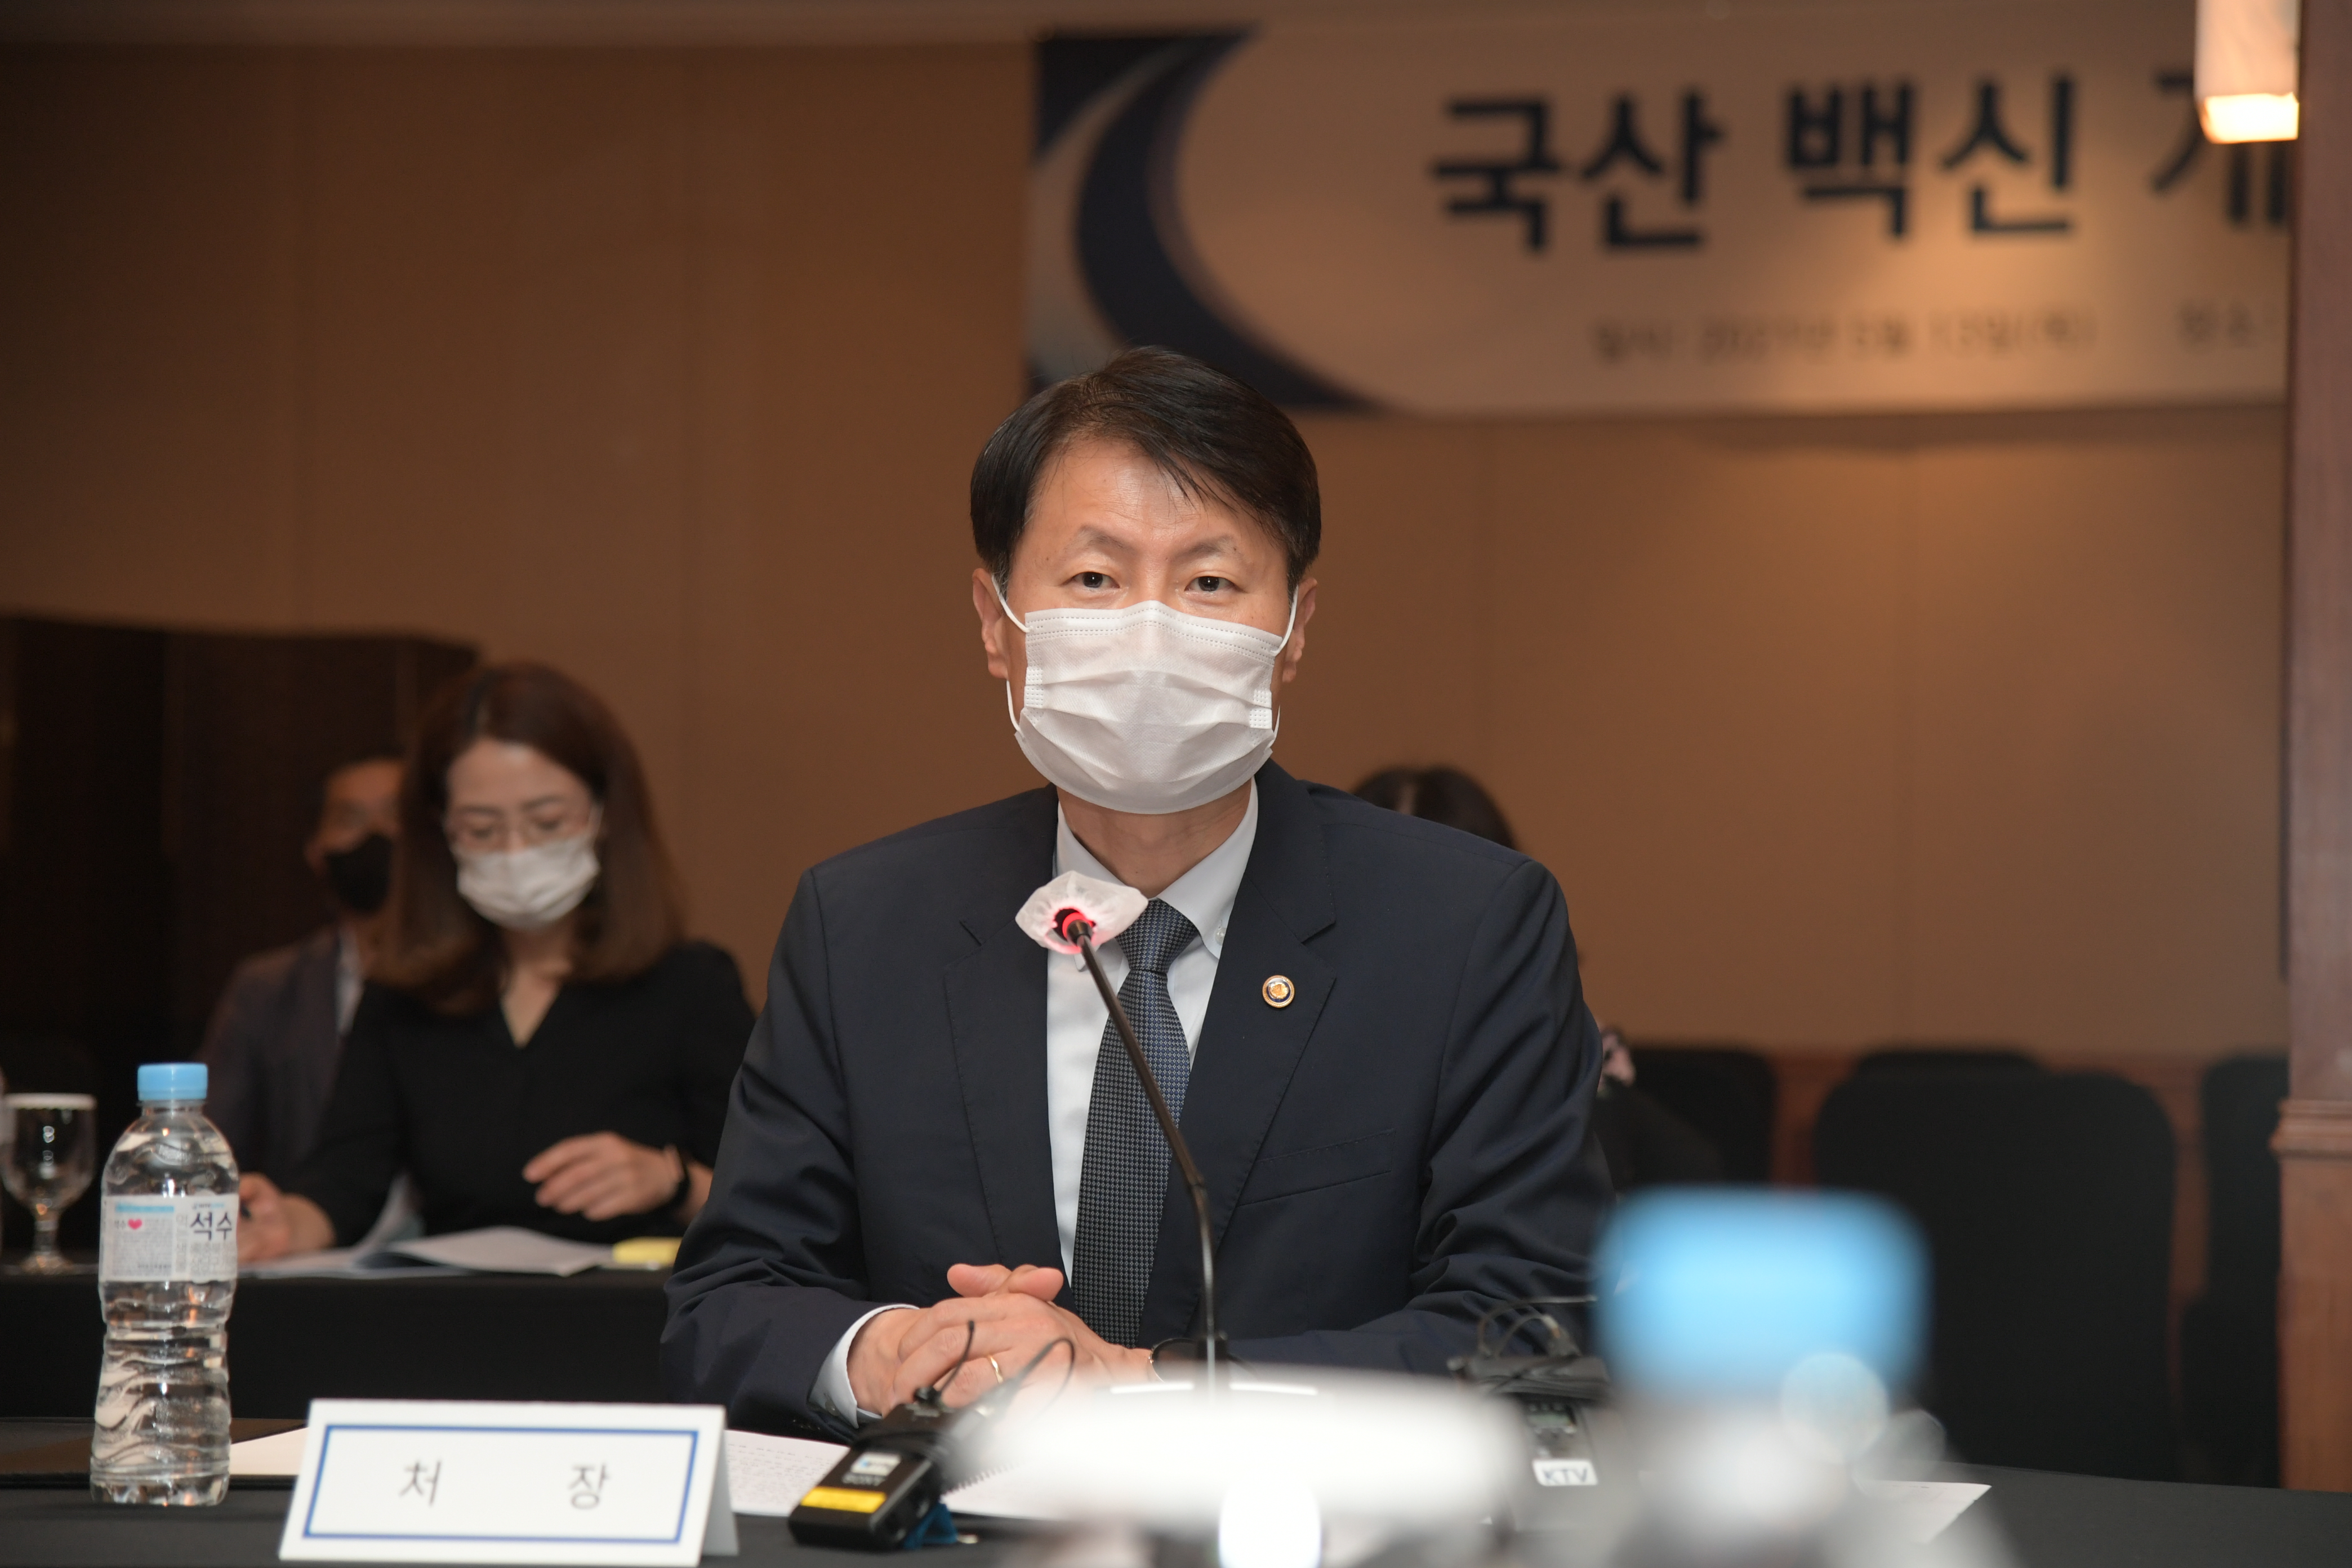 Photo News2 - [May 13, 2021] Minister attends the Meeting to Support the Development of Homegrown Vaccines